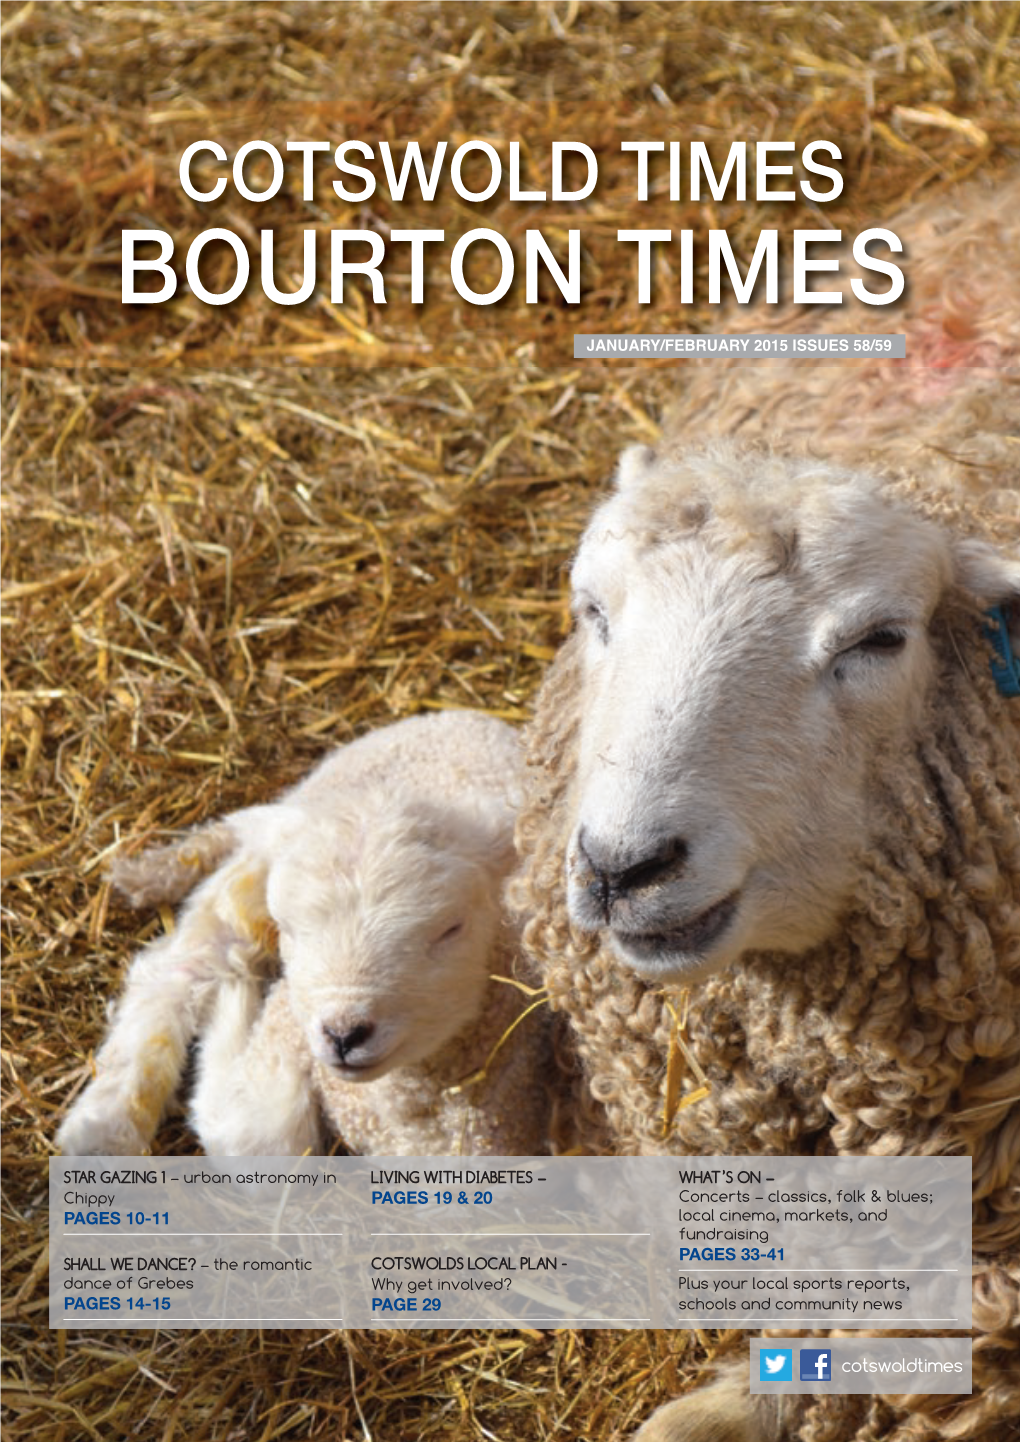 Bourton Times January/February 2015 Issues 58/59